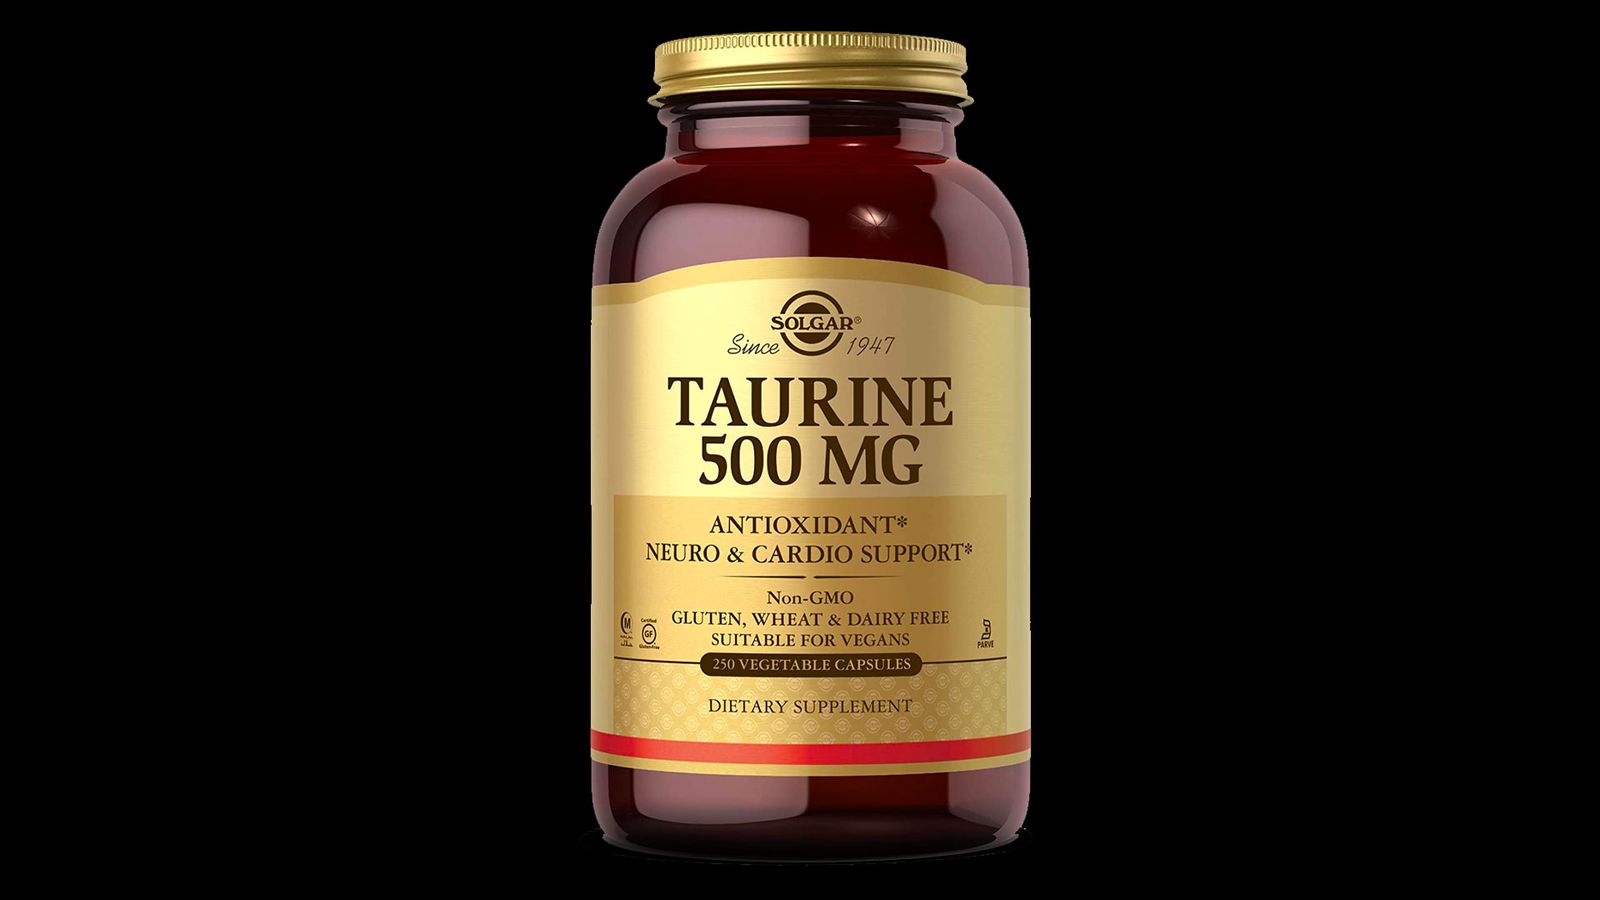 Solgar Taurine Vegetable Capsules product image of a brown container with gold and red branding.